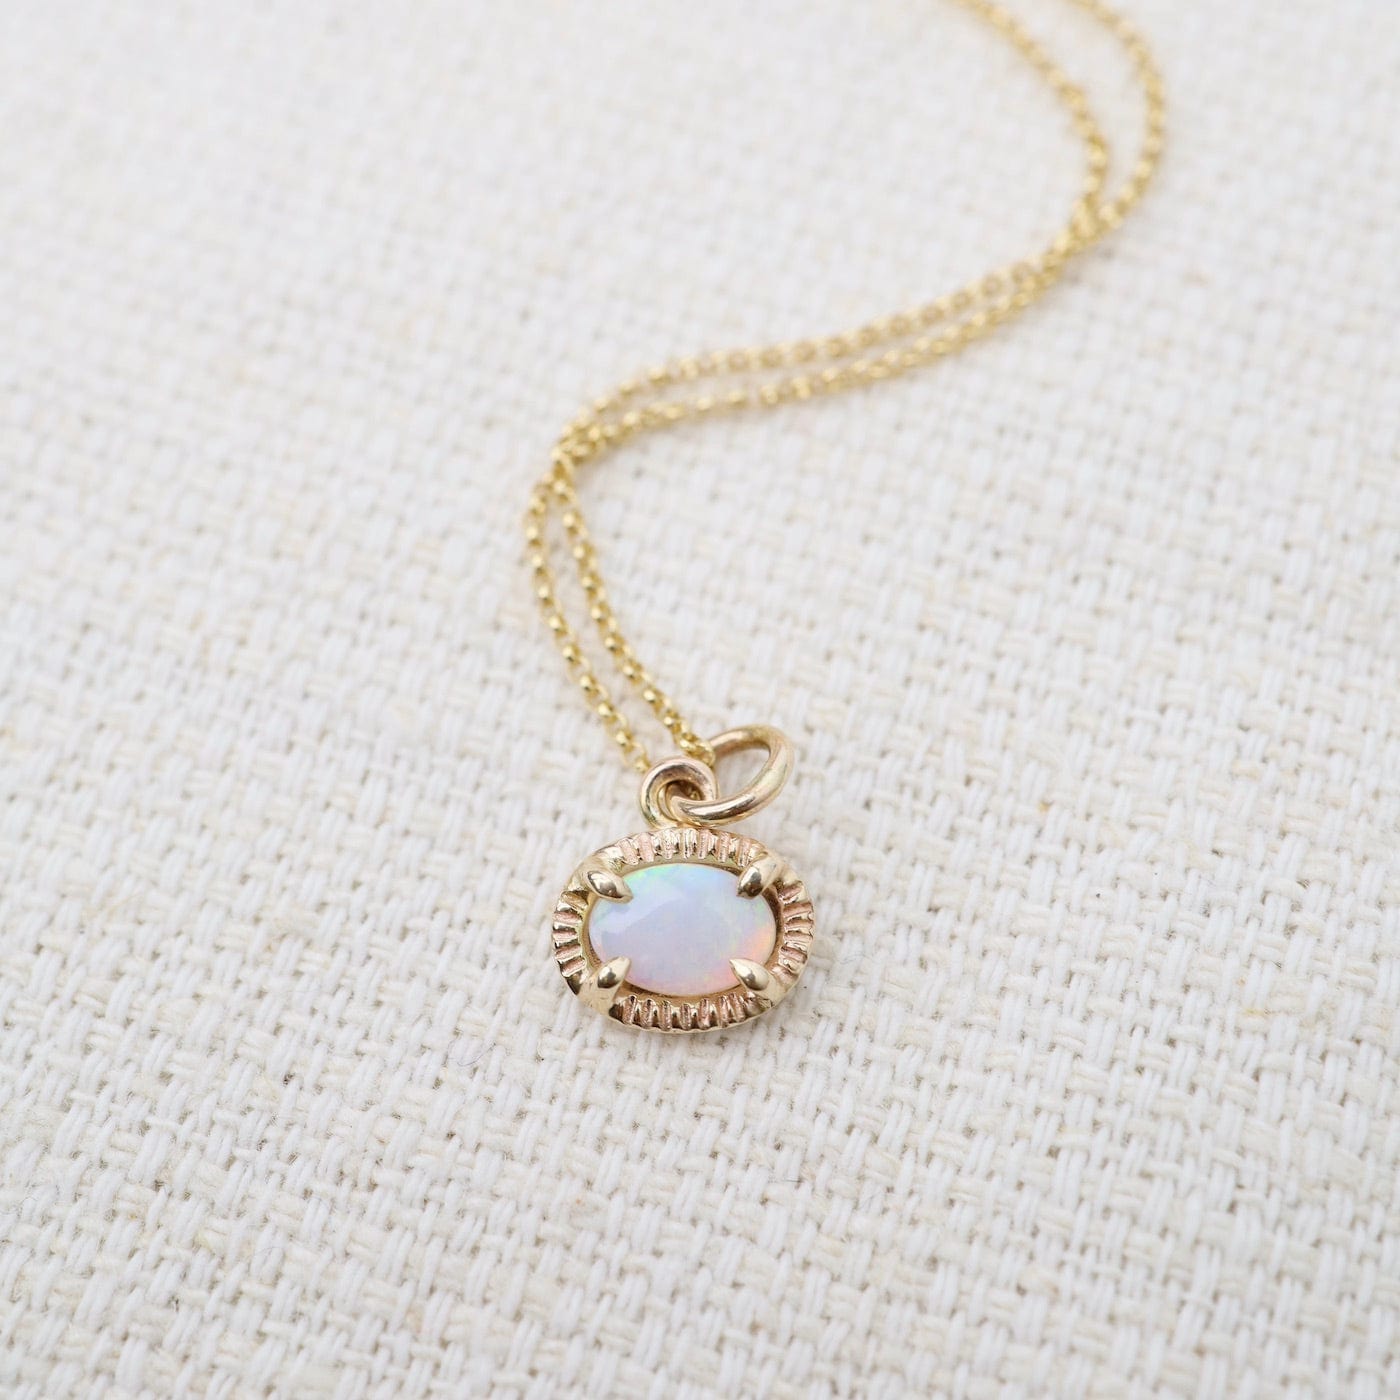 NKL-14K Swell Necklace - Opal